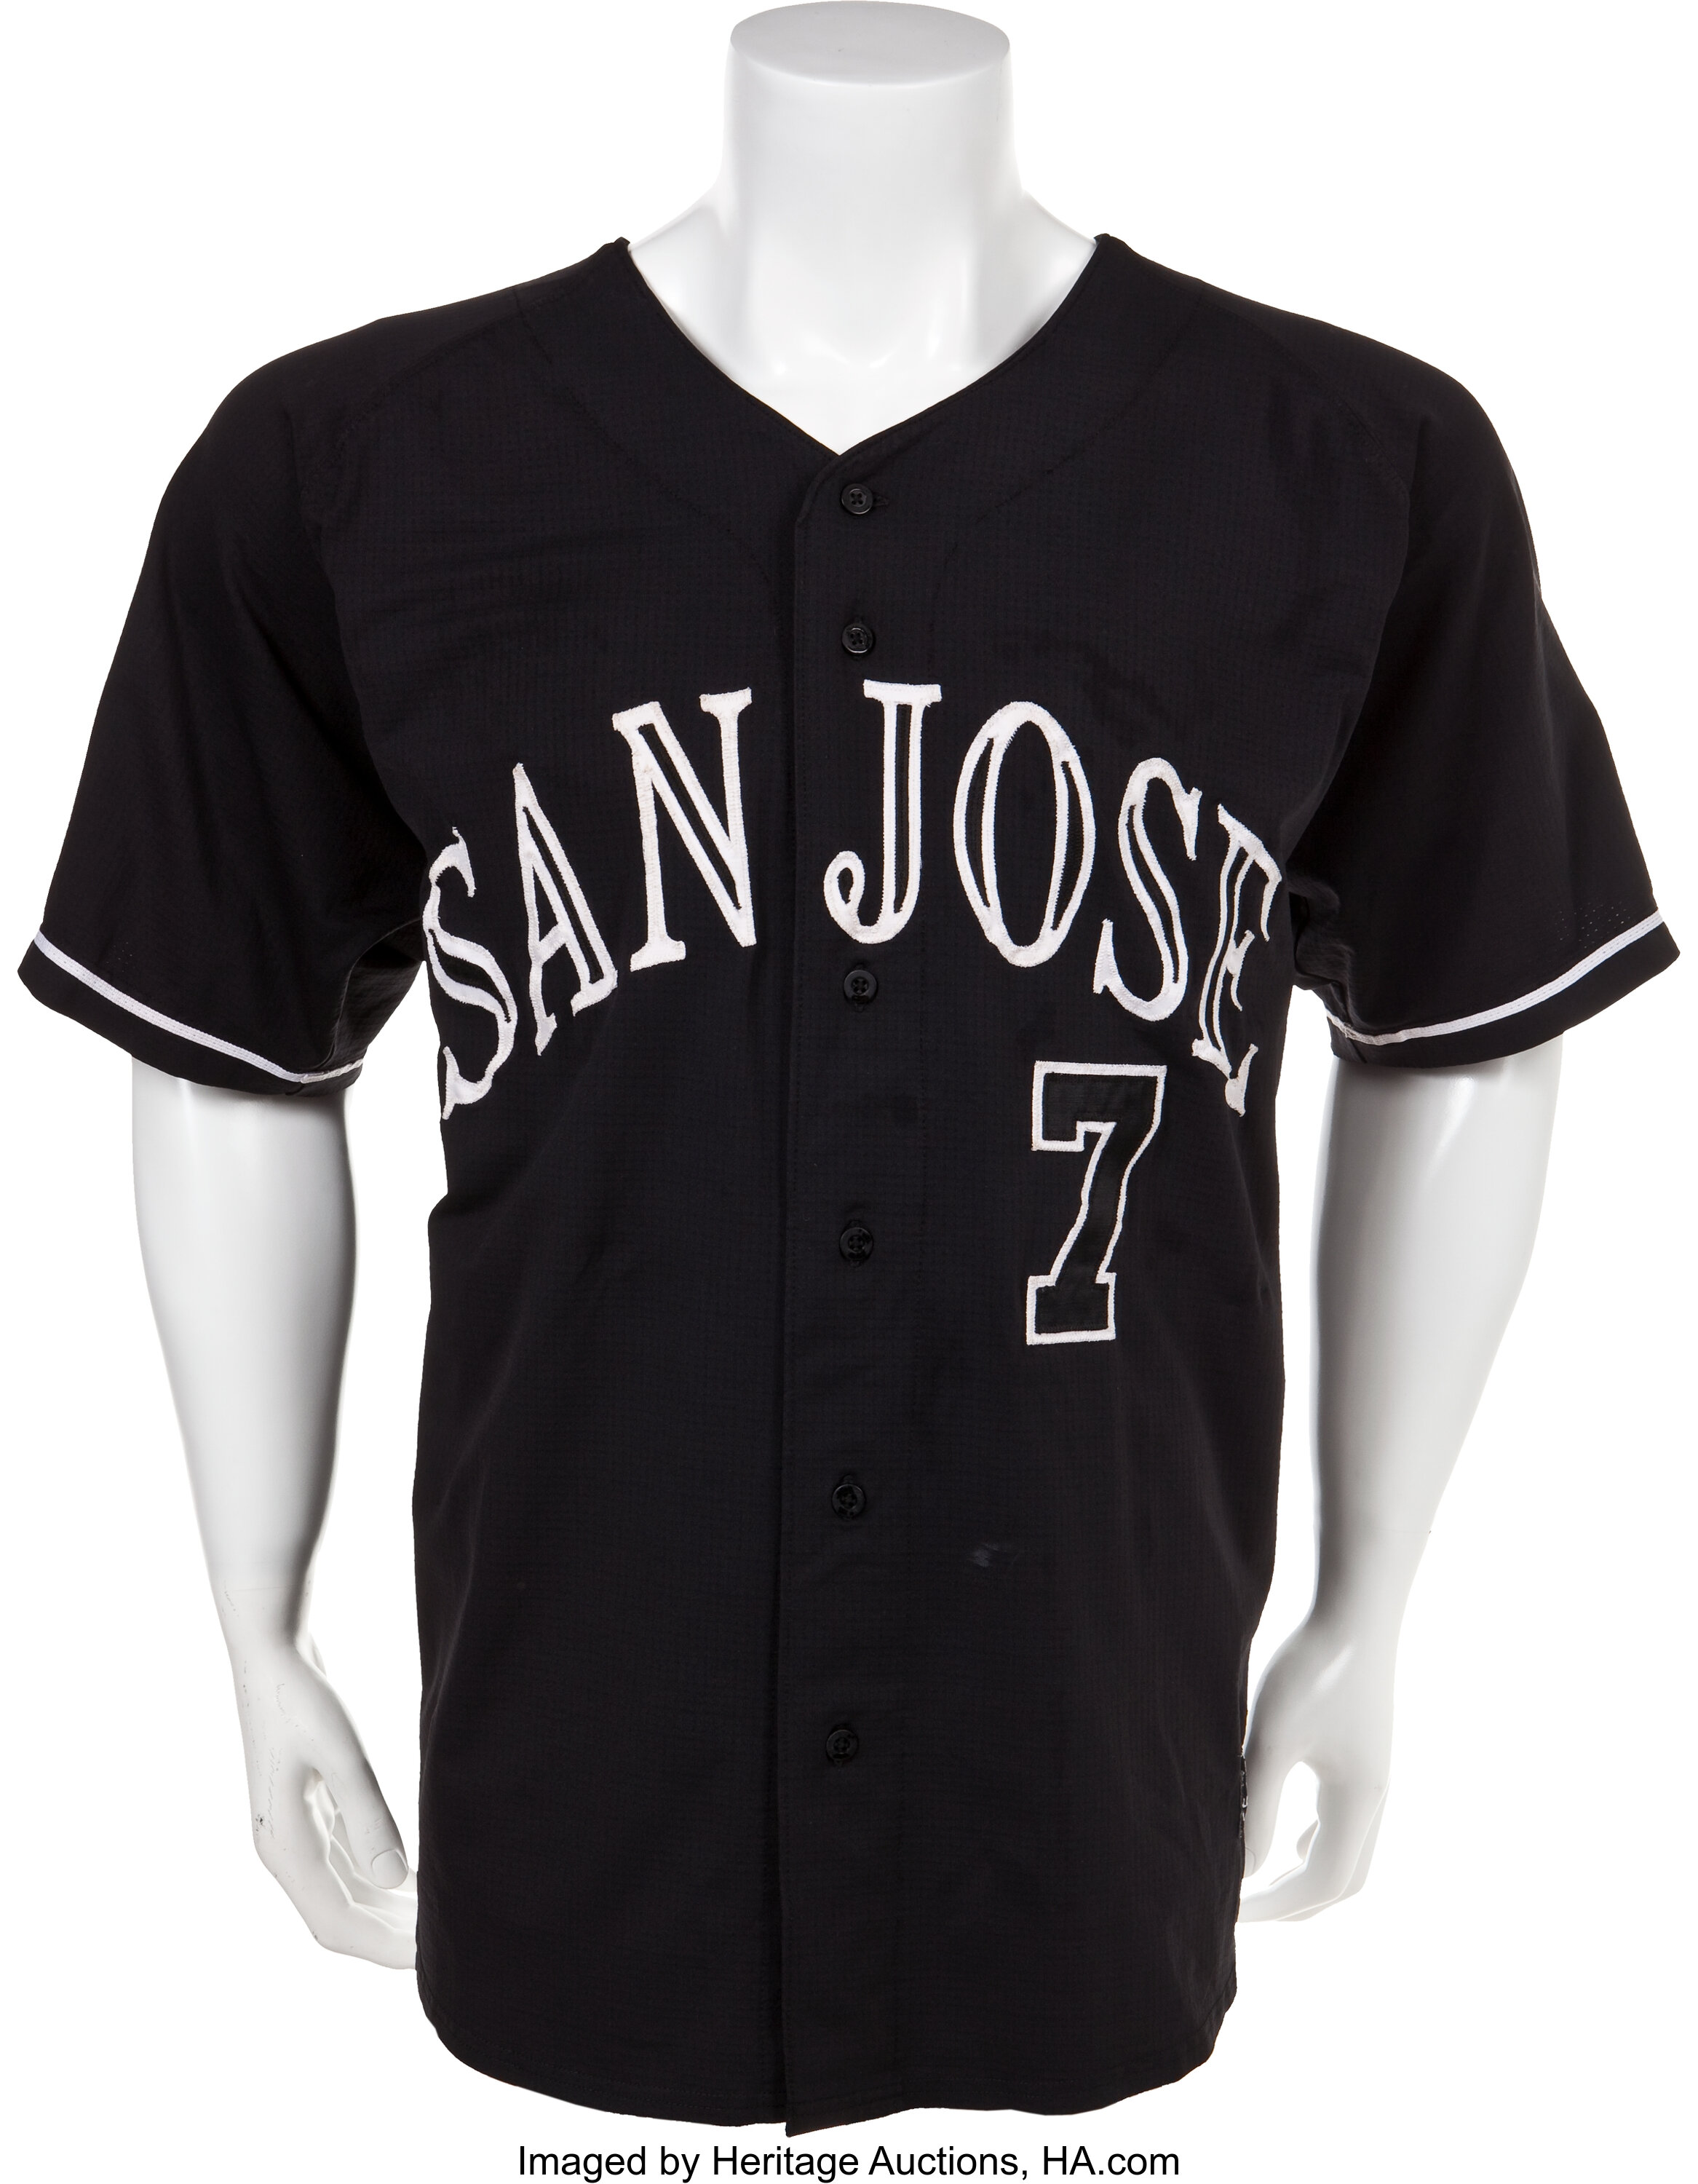 Buster Posey 6x ALL-STAR - Game-Used Jerseys - Mother's and